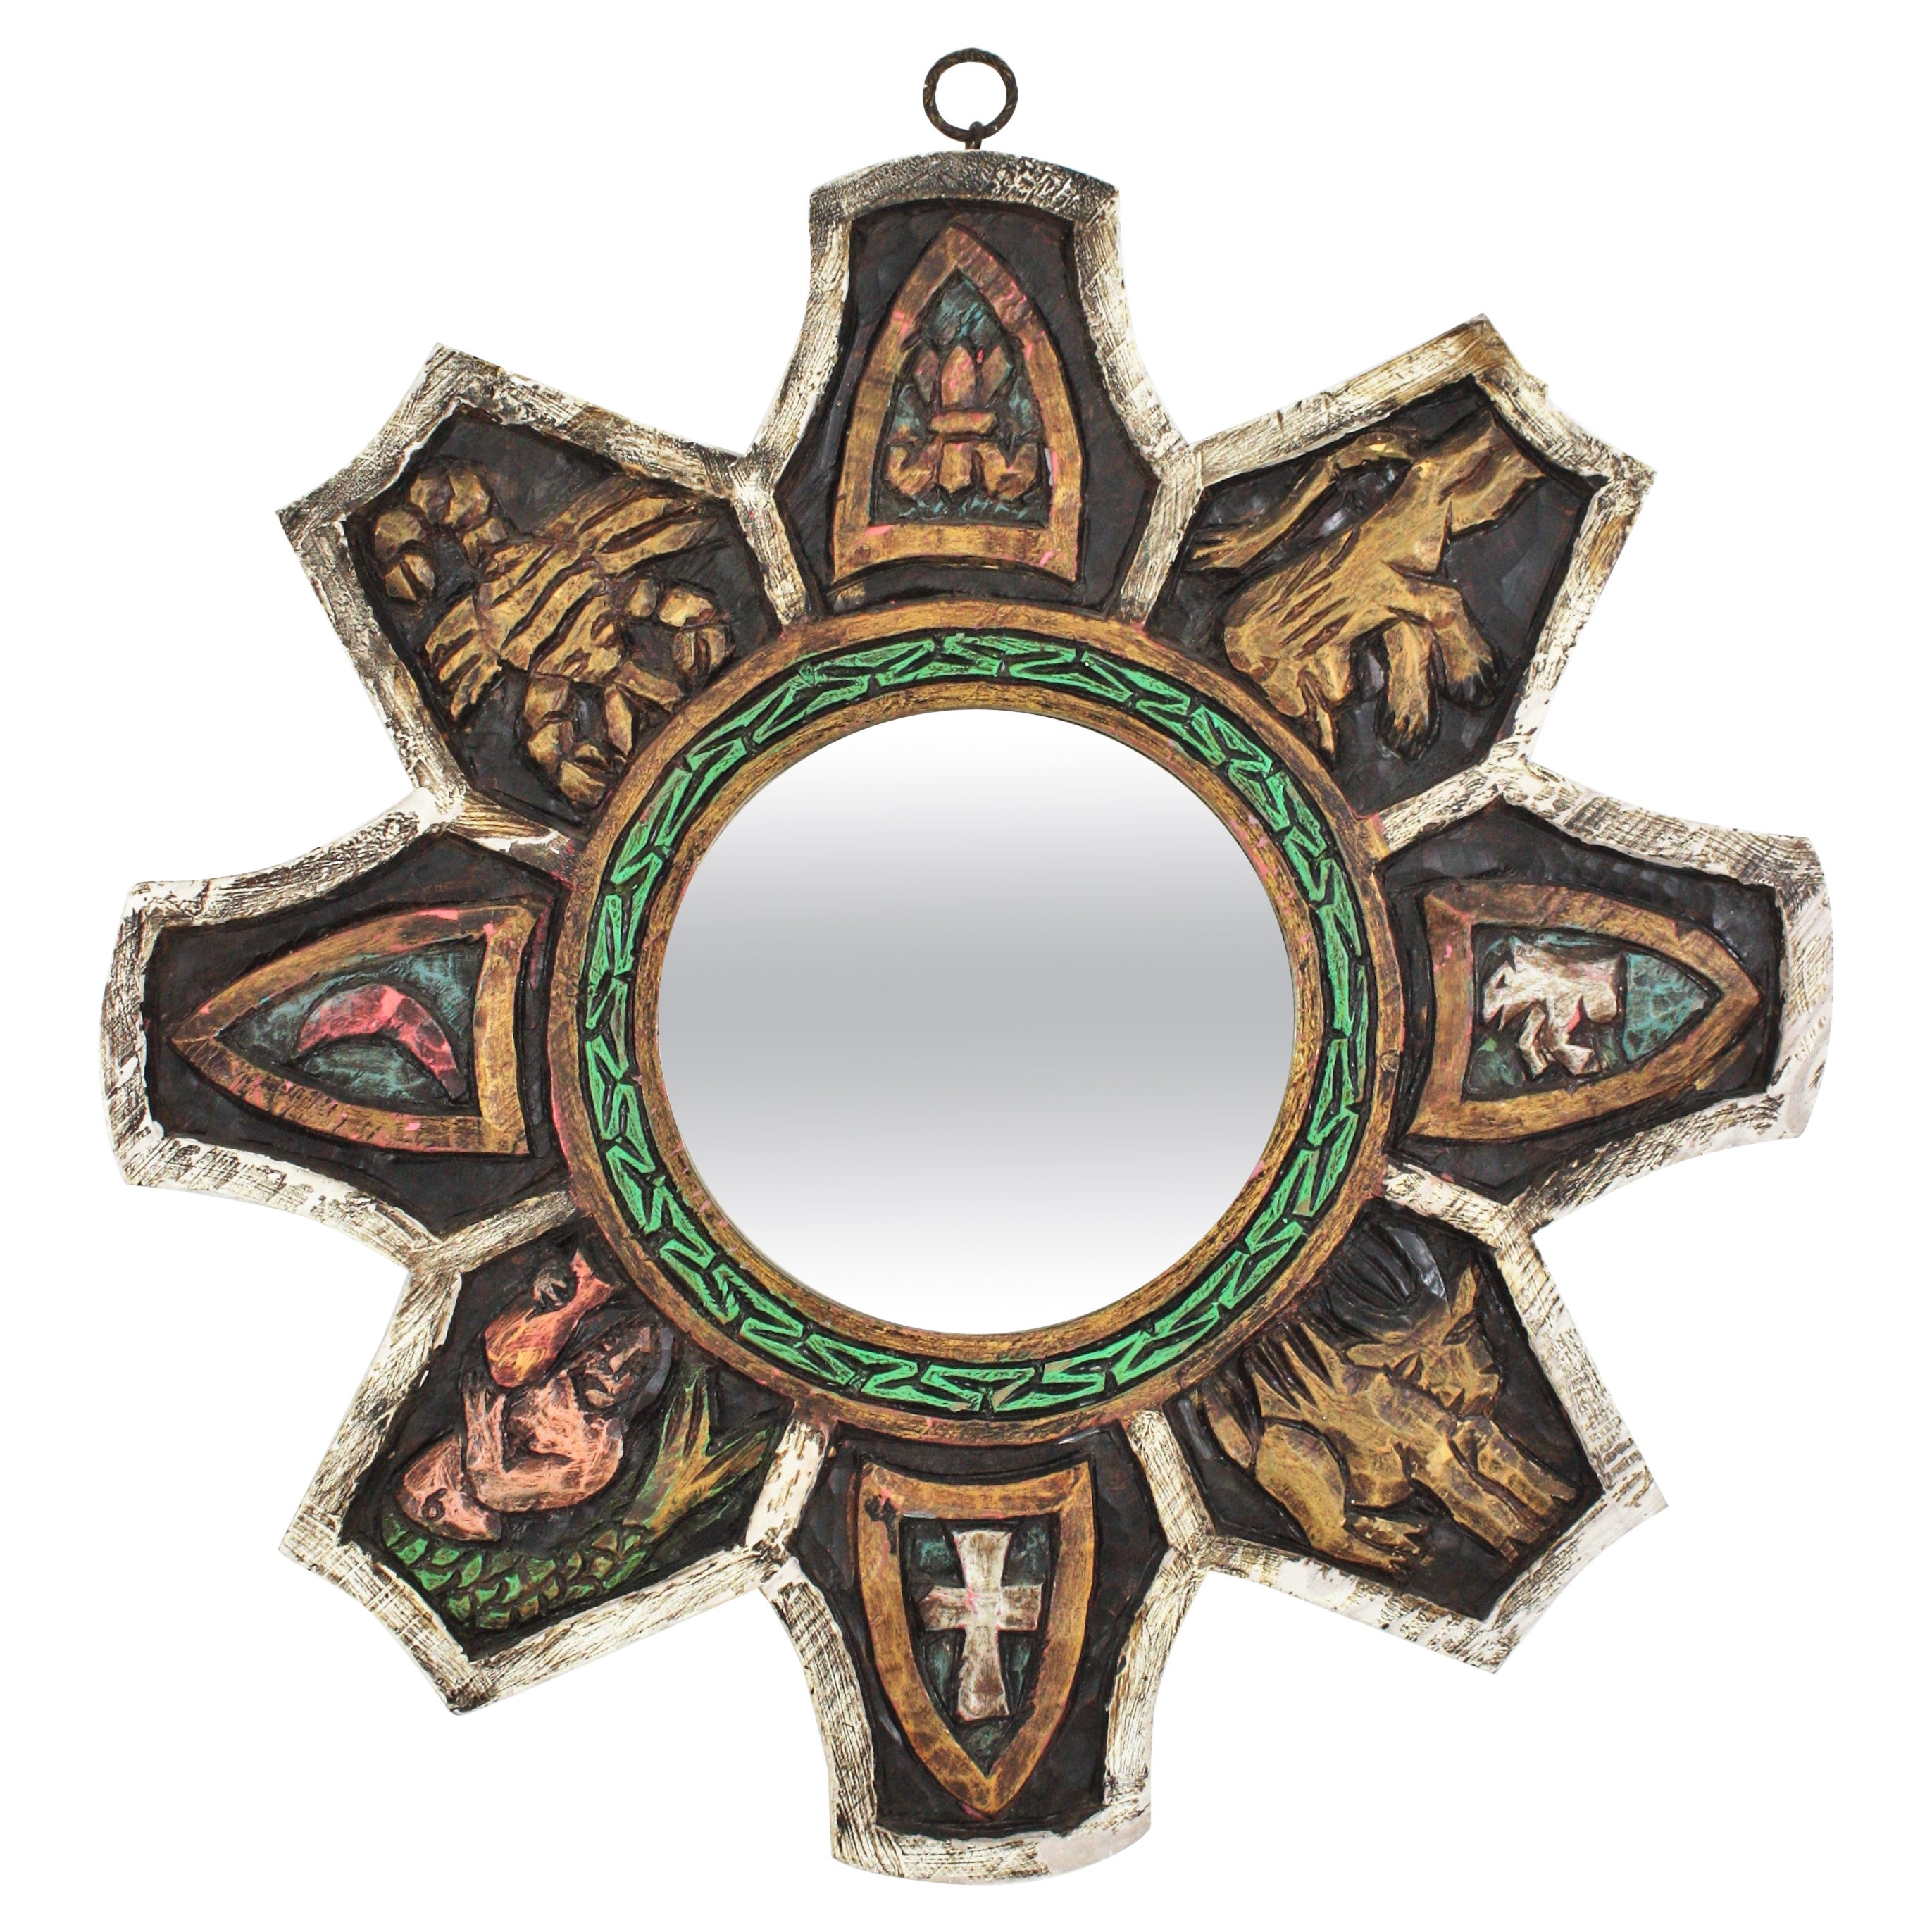 Medieval Inspired Sunburst Mirror in Polychrome Carved Wood